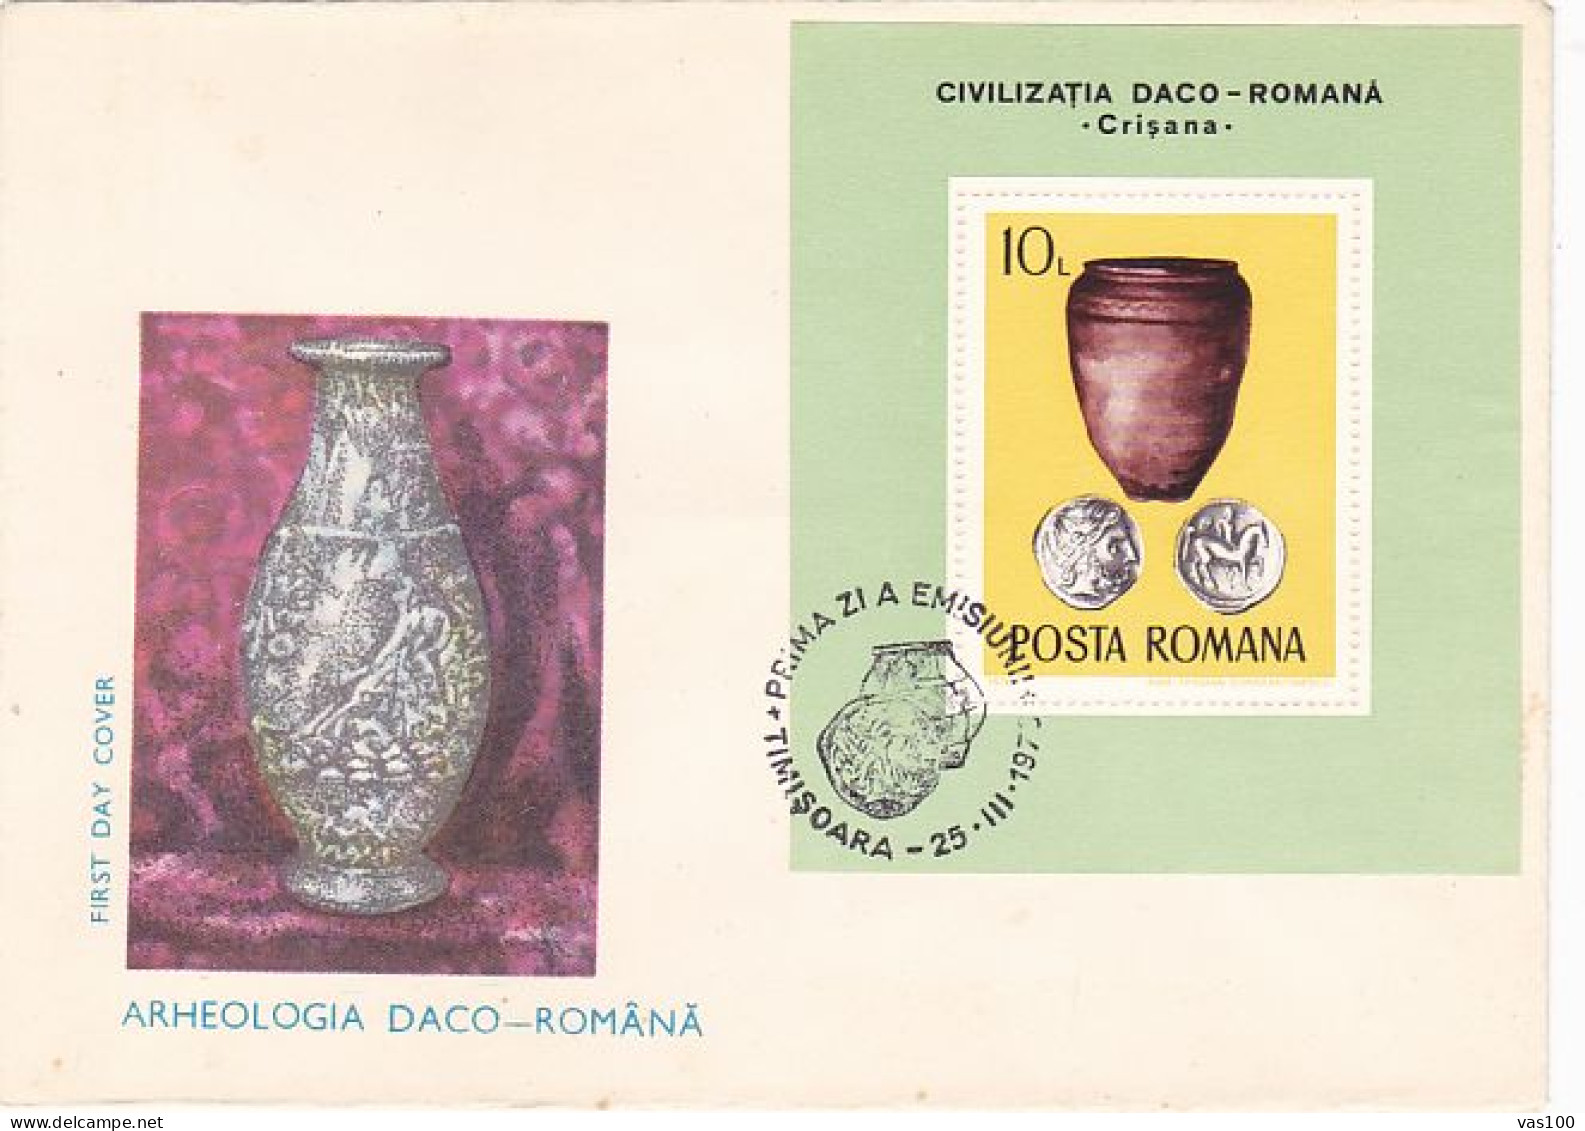 ARCHAEOLOGY, ANCIENT DACIAN AND ROMAN RELICS, COVER FDC, 1976, ROMANIA - Archeologie